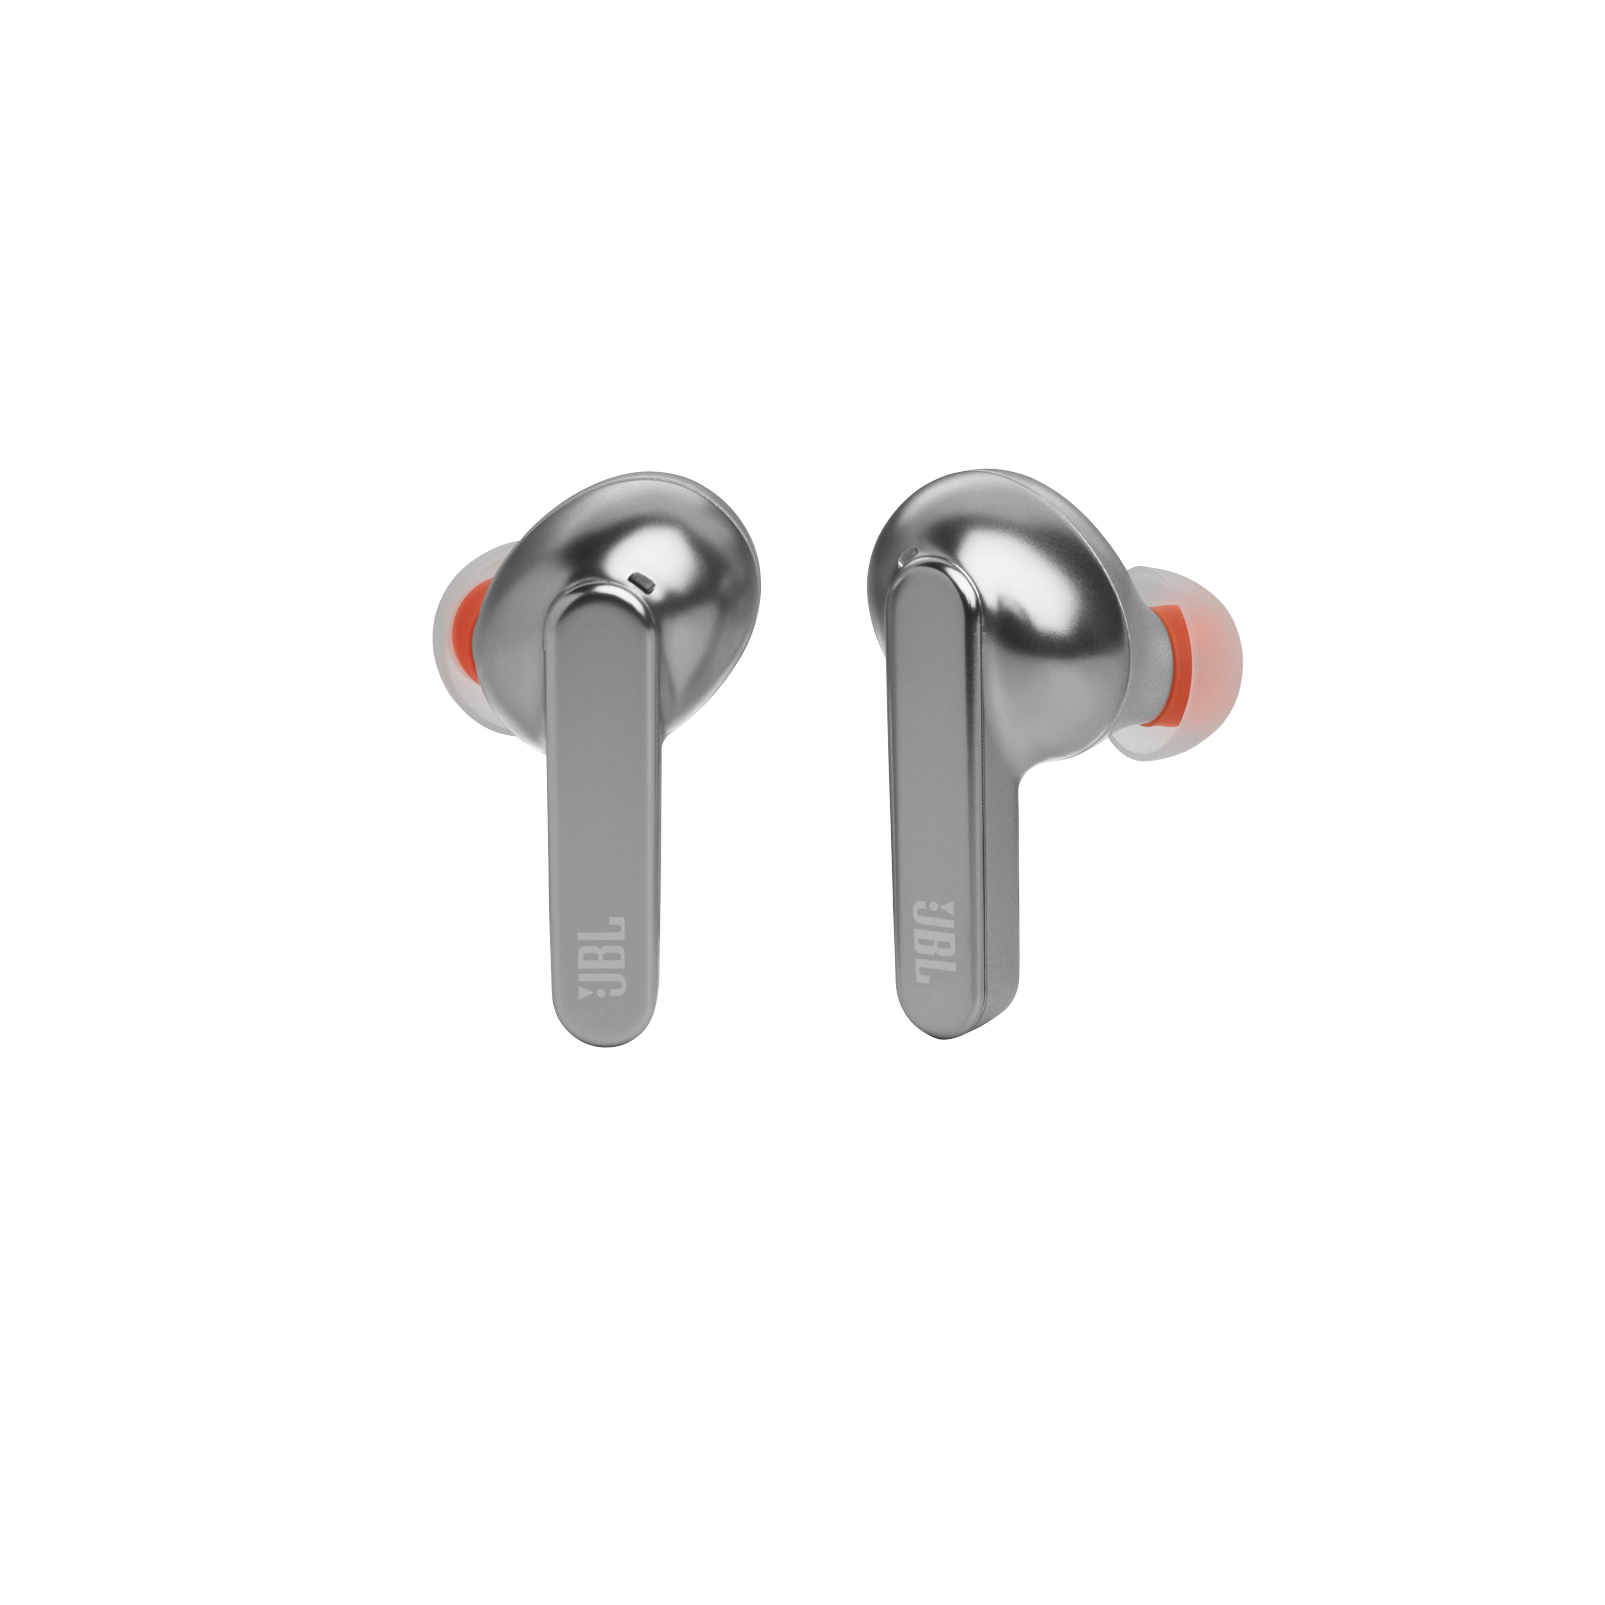 JBL Live Pro+ TWS - Chrome - True wireless Noise Cancelling earbuds - Front